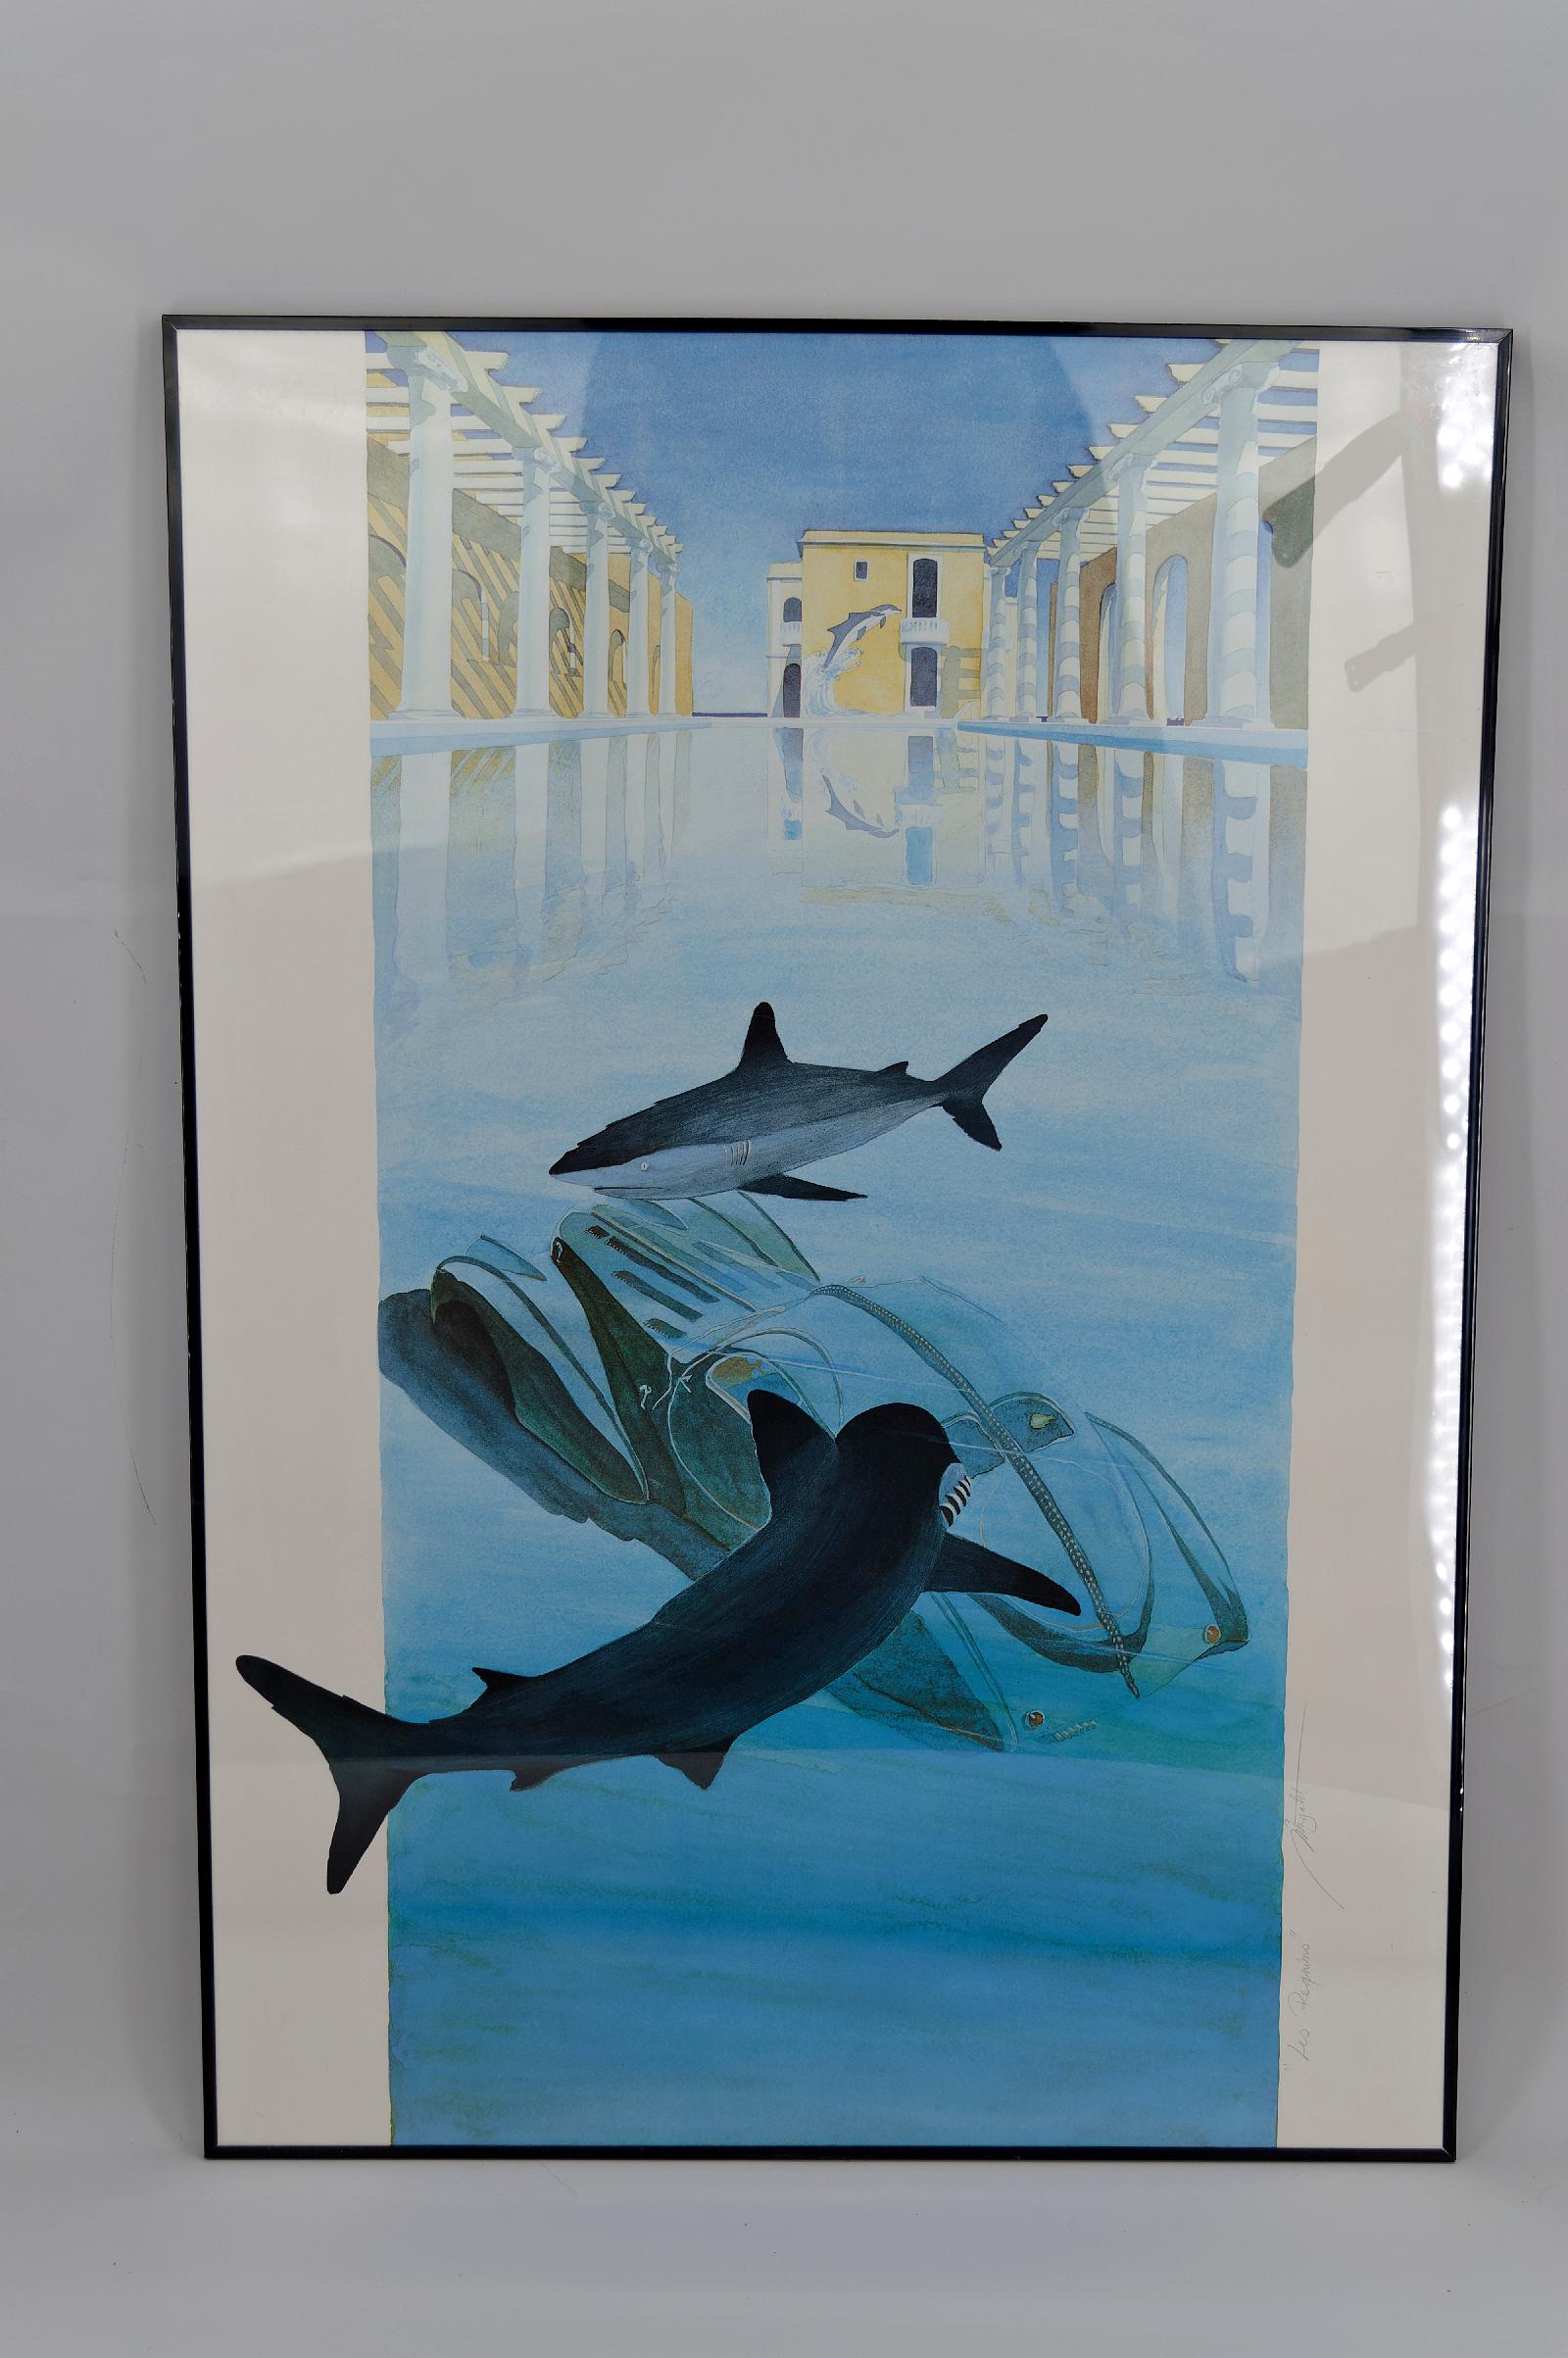 Superb framed lithograph representing a swimming pool surrounded by colonnades with a couple of dolphins leaping out of the water in the background. We find in the foreground 2 sharks revolving around an old car (a Bugatti Type 57 Atlantic) stranded